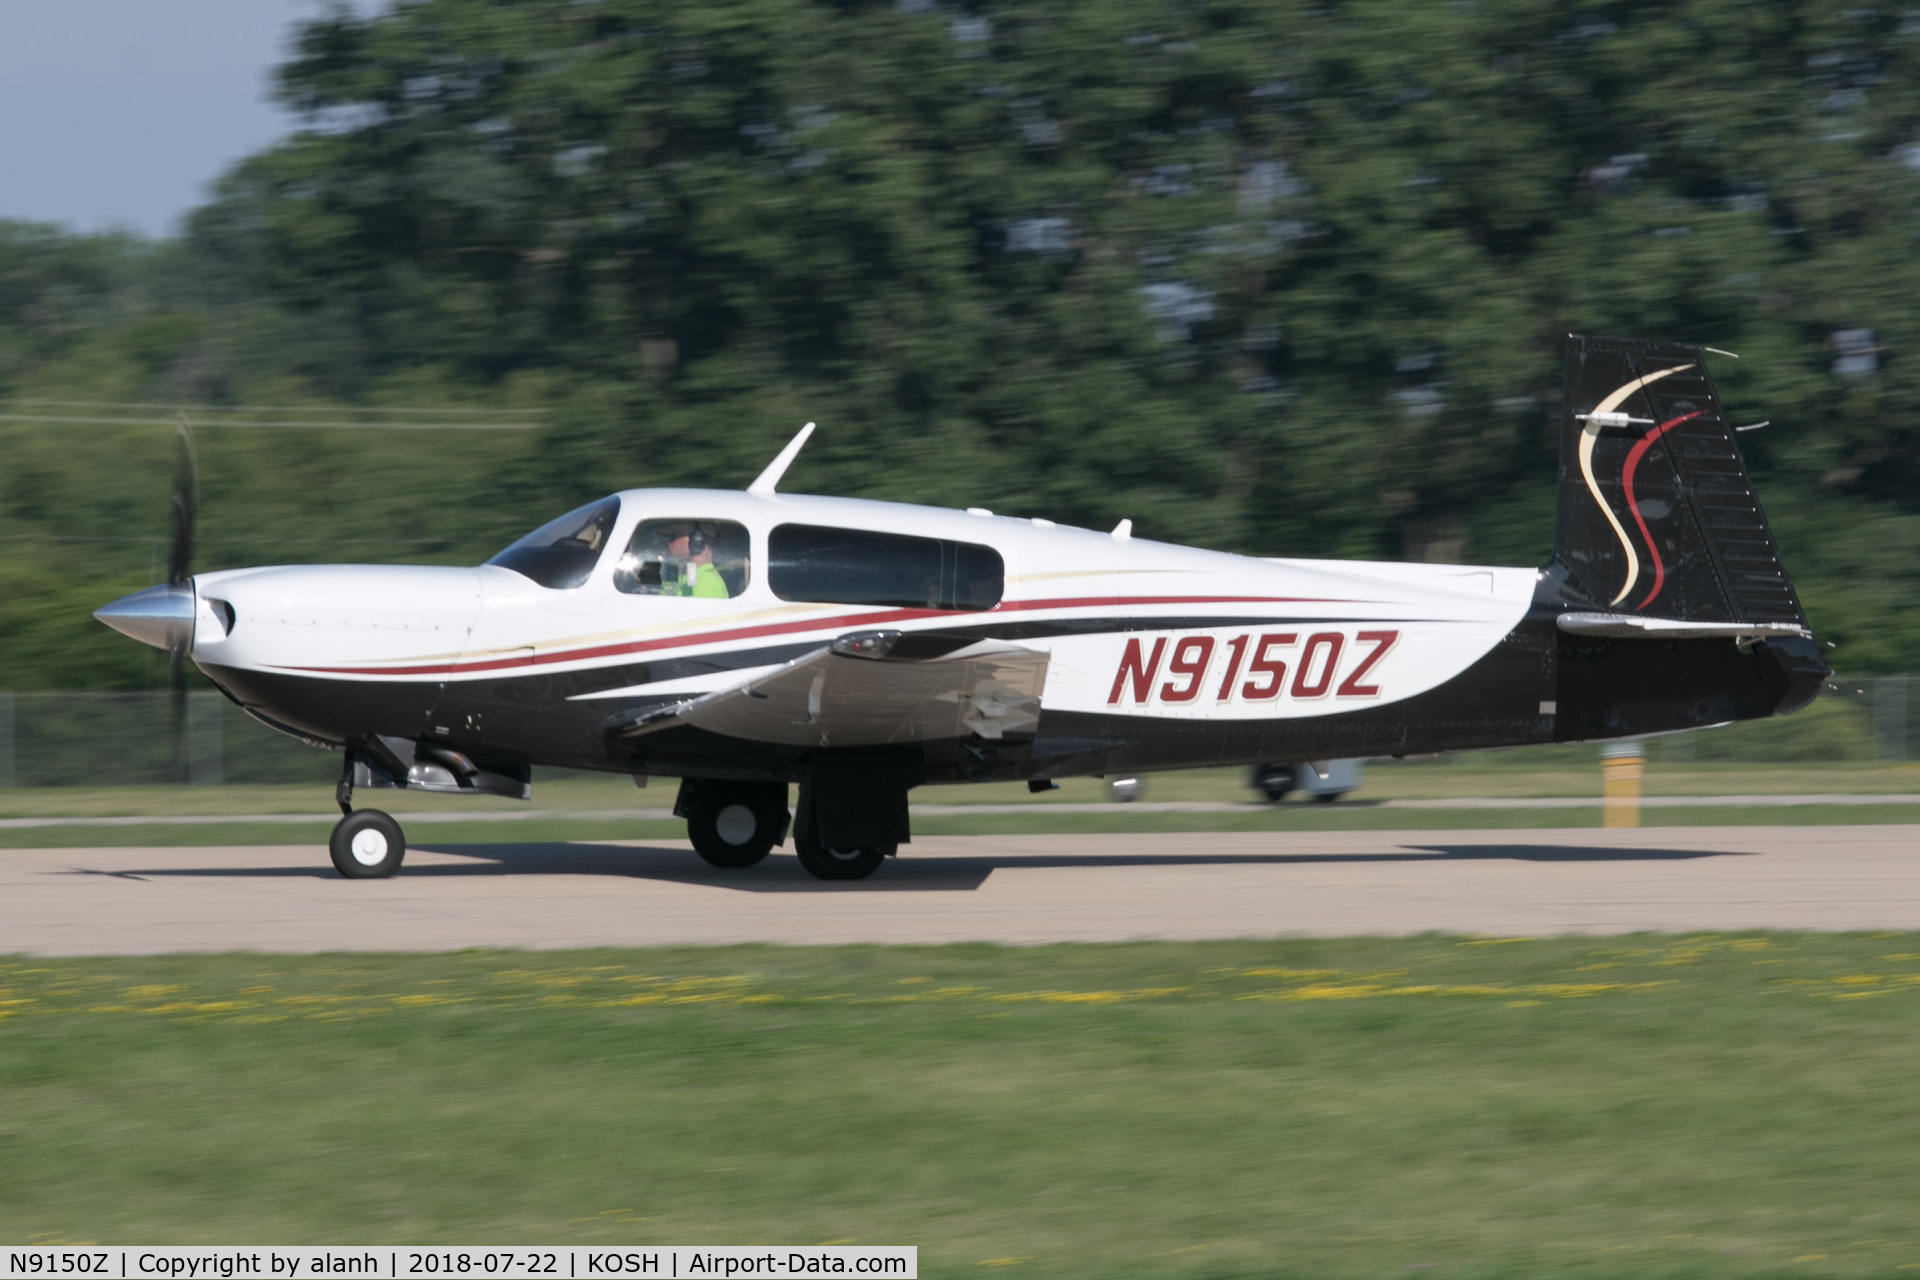 N9150Z, 1991 Mooney M20M Bravo C/N 27-0116, Arriving at AirVenture 2018 (in company with 60 other Mooneys)